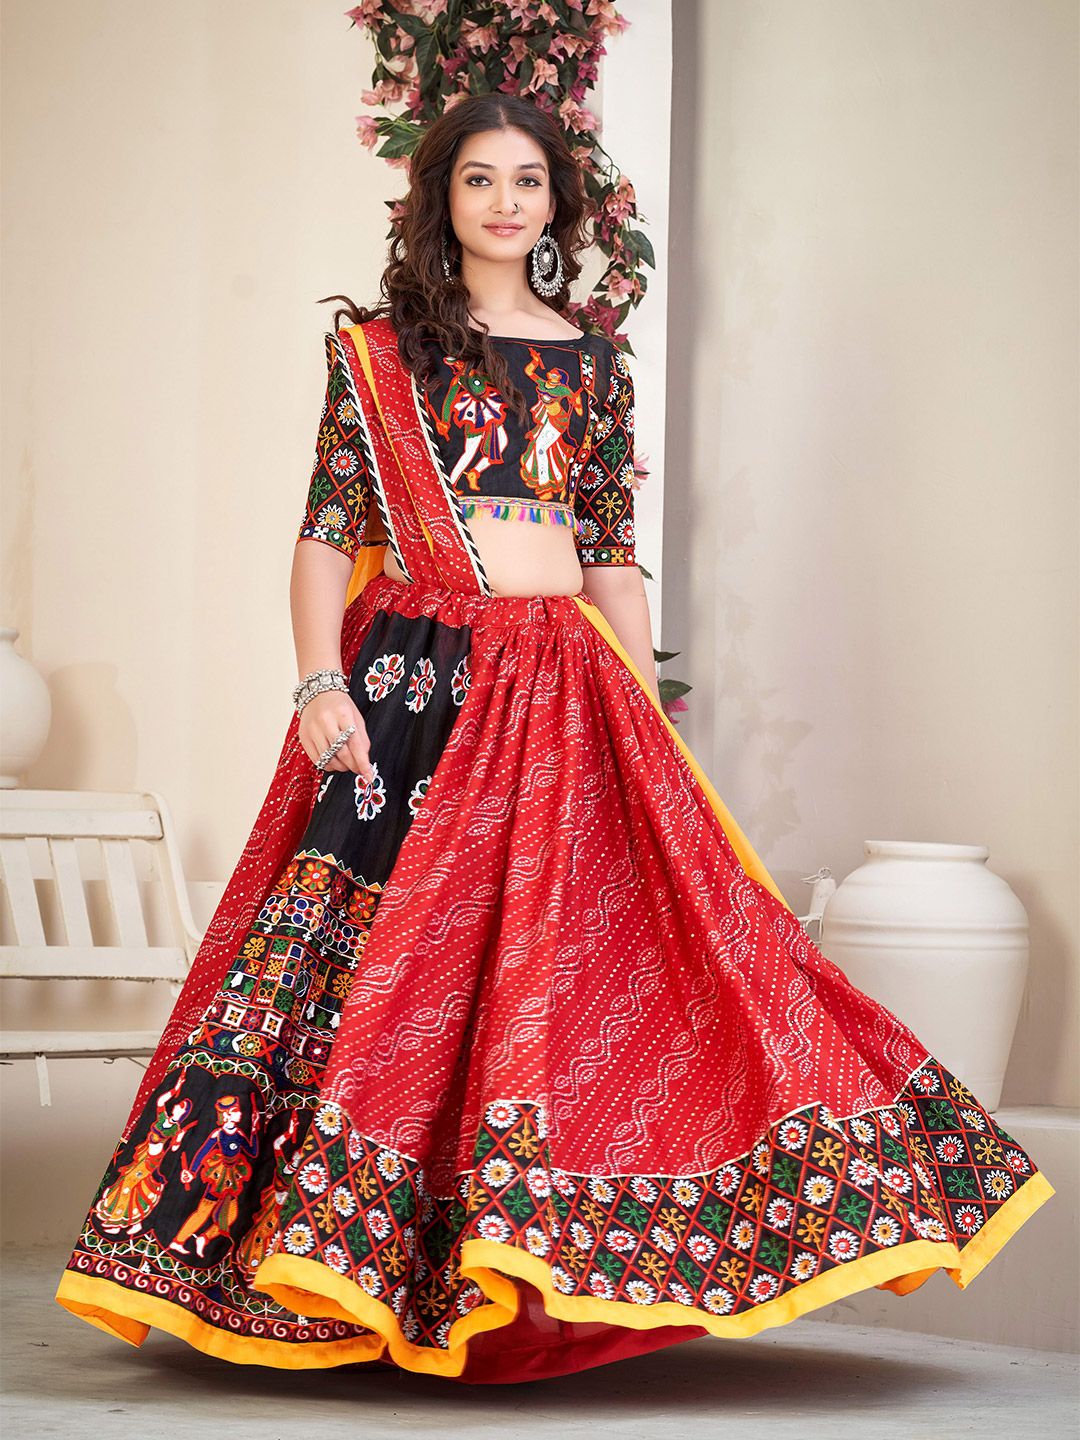 KALINI Embroidered Thread Work Semi-Stitched Lehenga & Unstitched Blouse With Dupatta Price in India